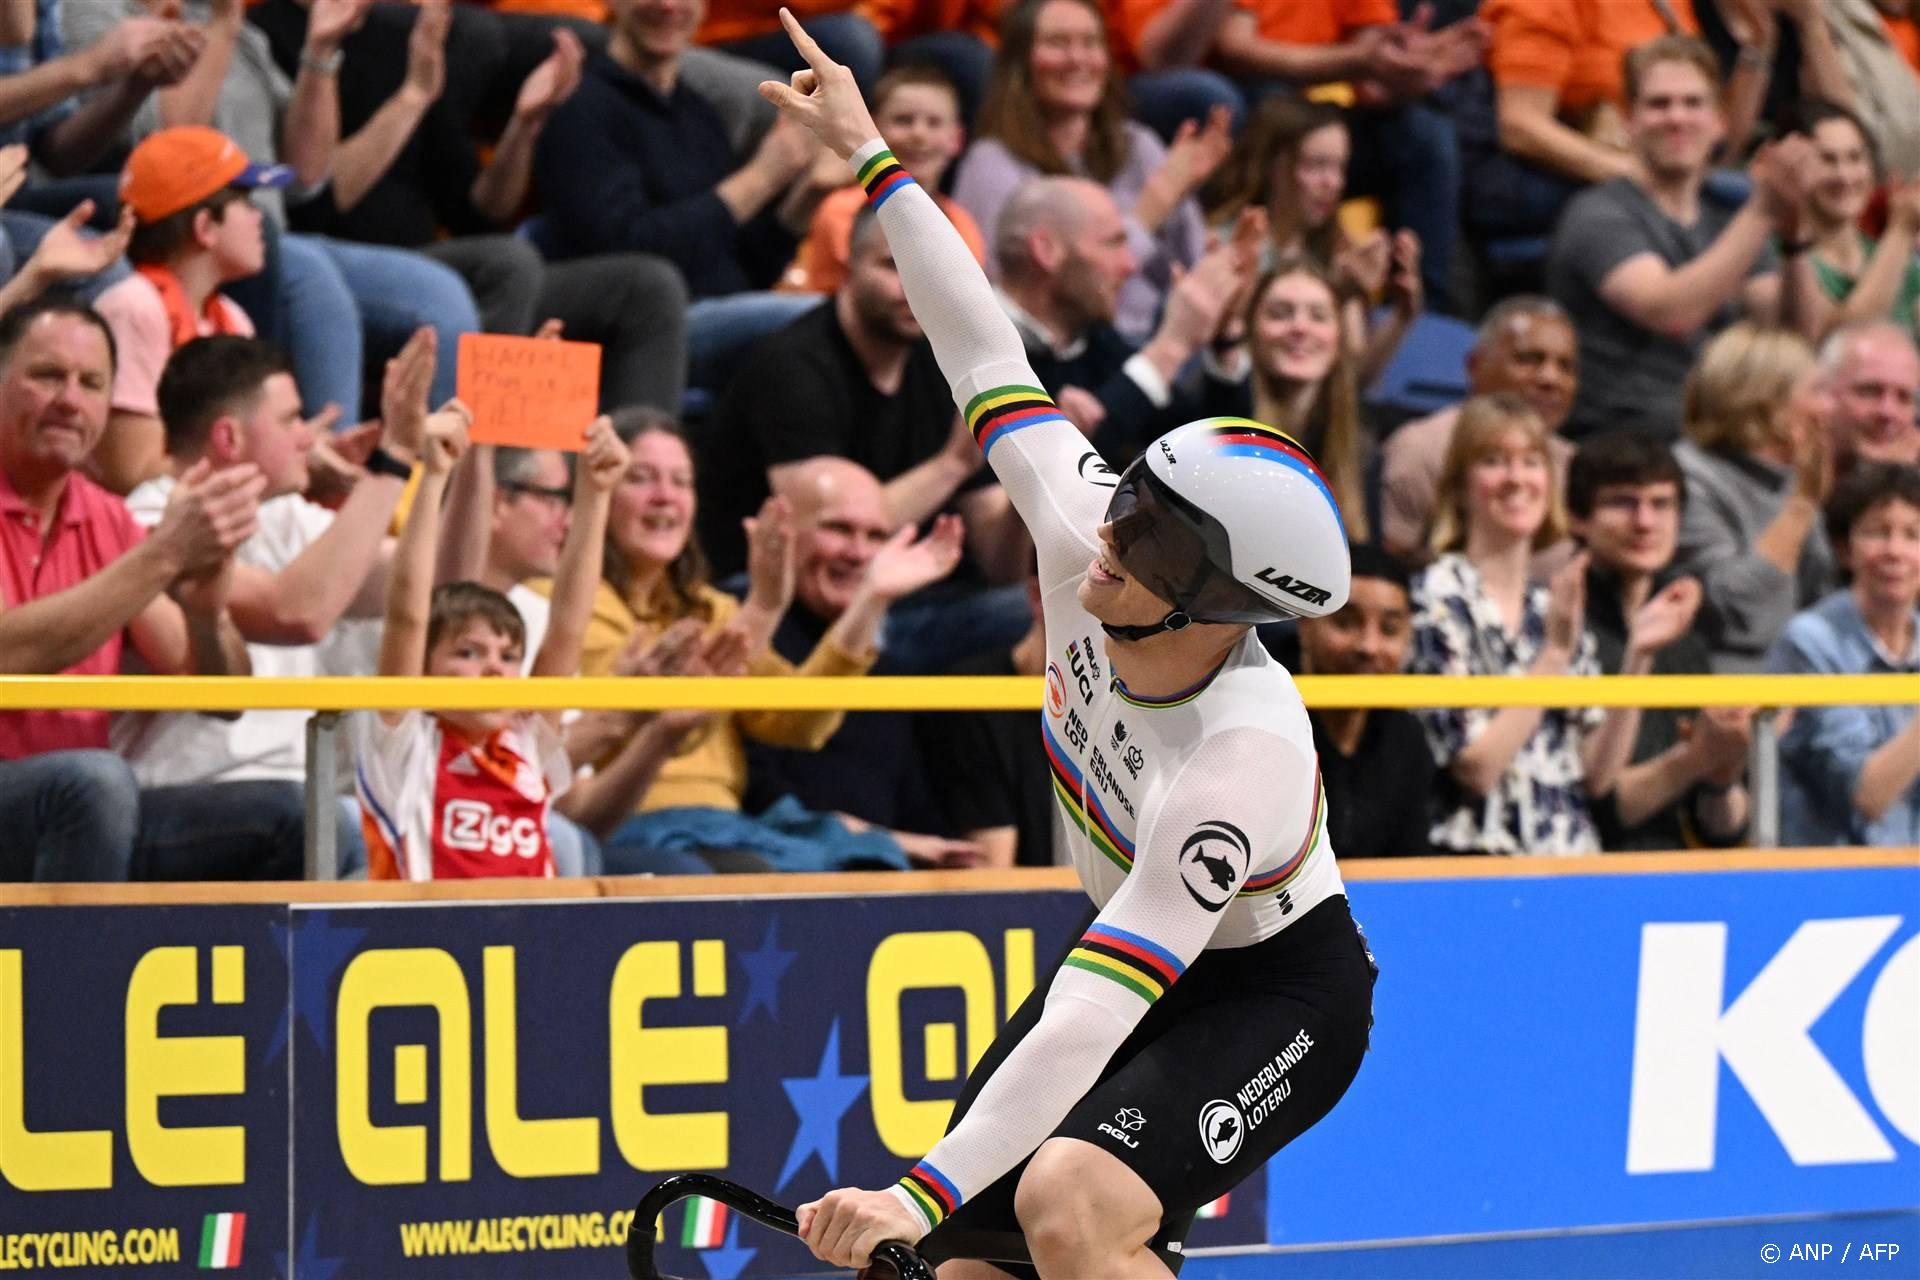 Netherlands' Harrie Lavreysen celebrates and gestures after winning heat 1 of the Men's Sprint semi-final race during the fourth day of the UEC European Track Cycling Championships at the Omnisport indoor arena in Apeldoorn, on January 13, 2024. 
JOHN THYS / AFP